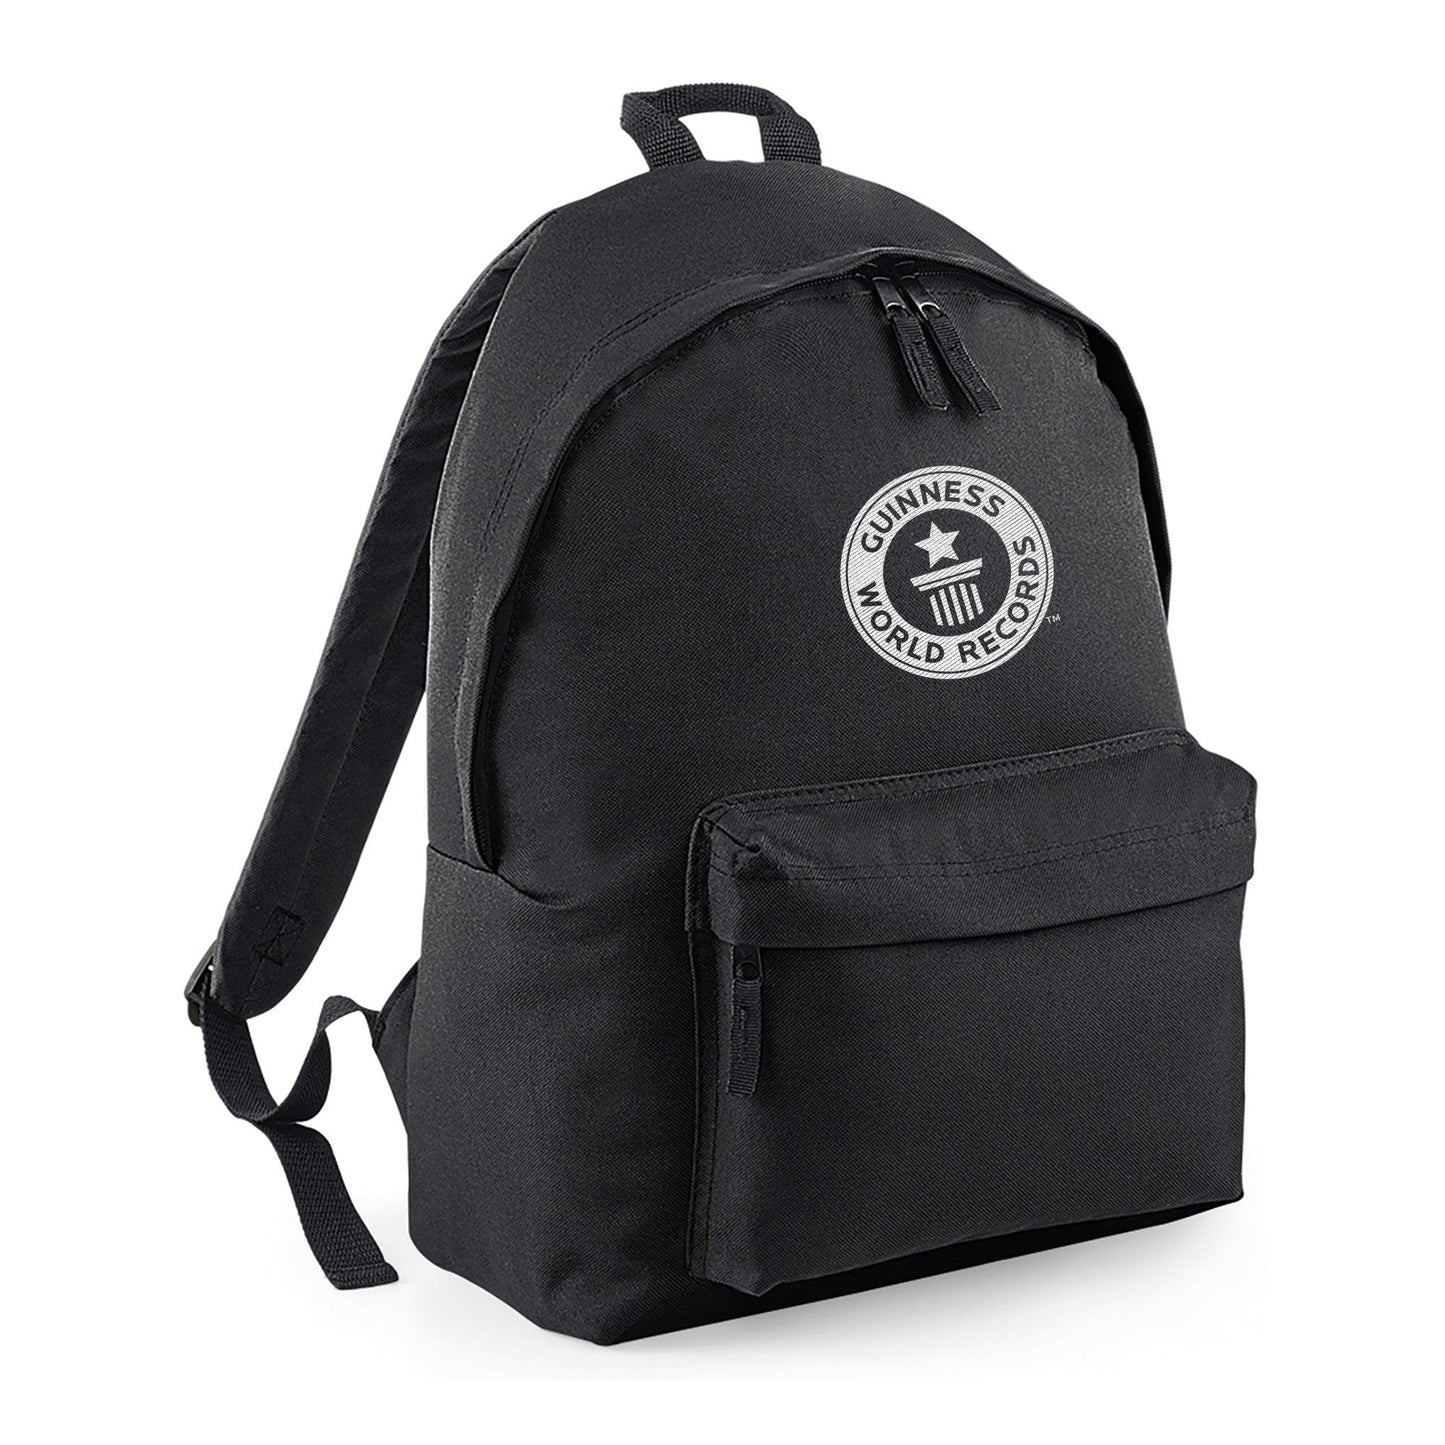 Backpack with white logo